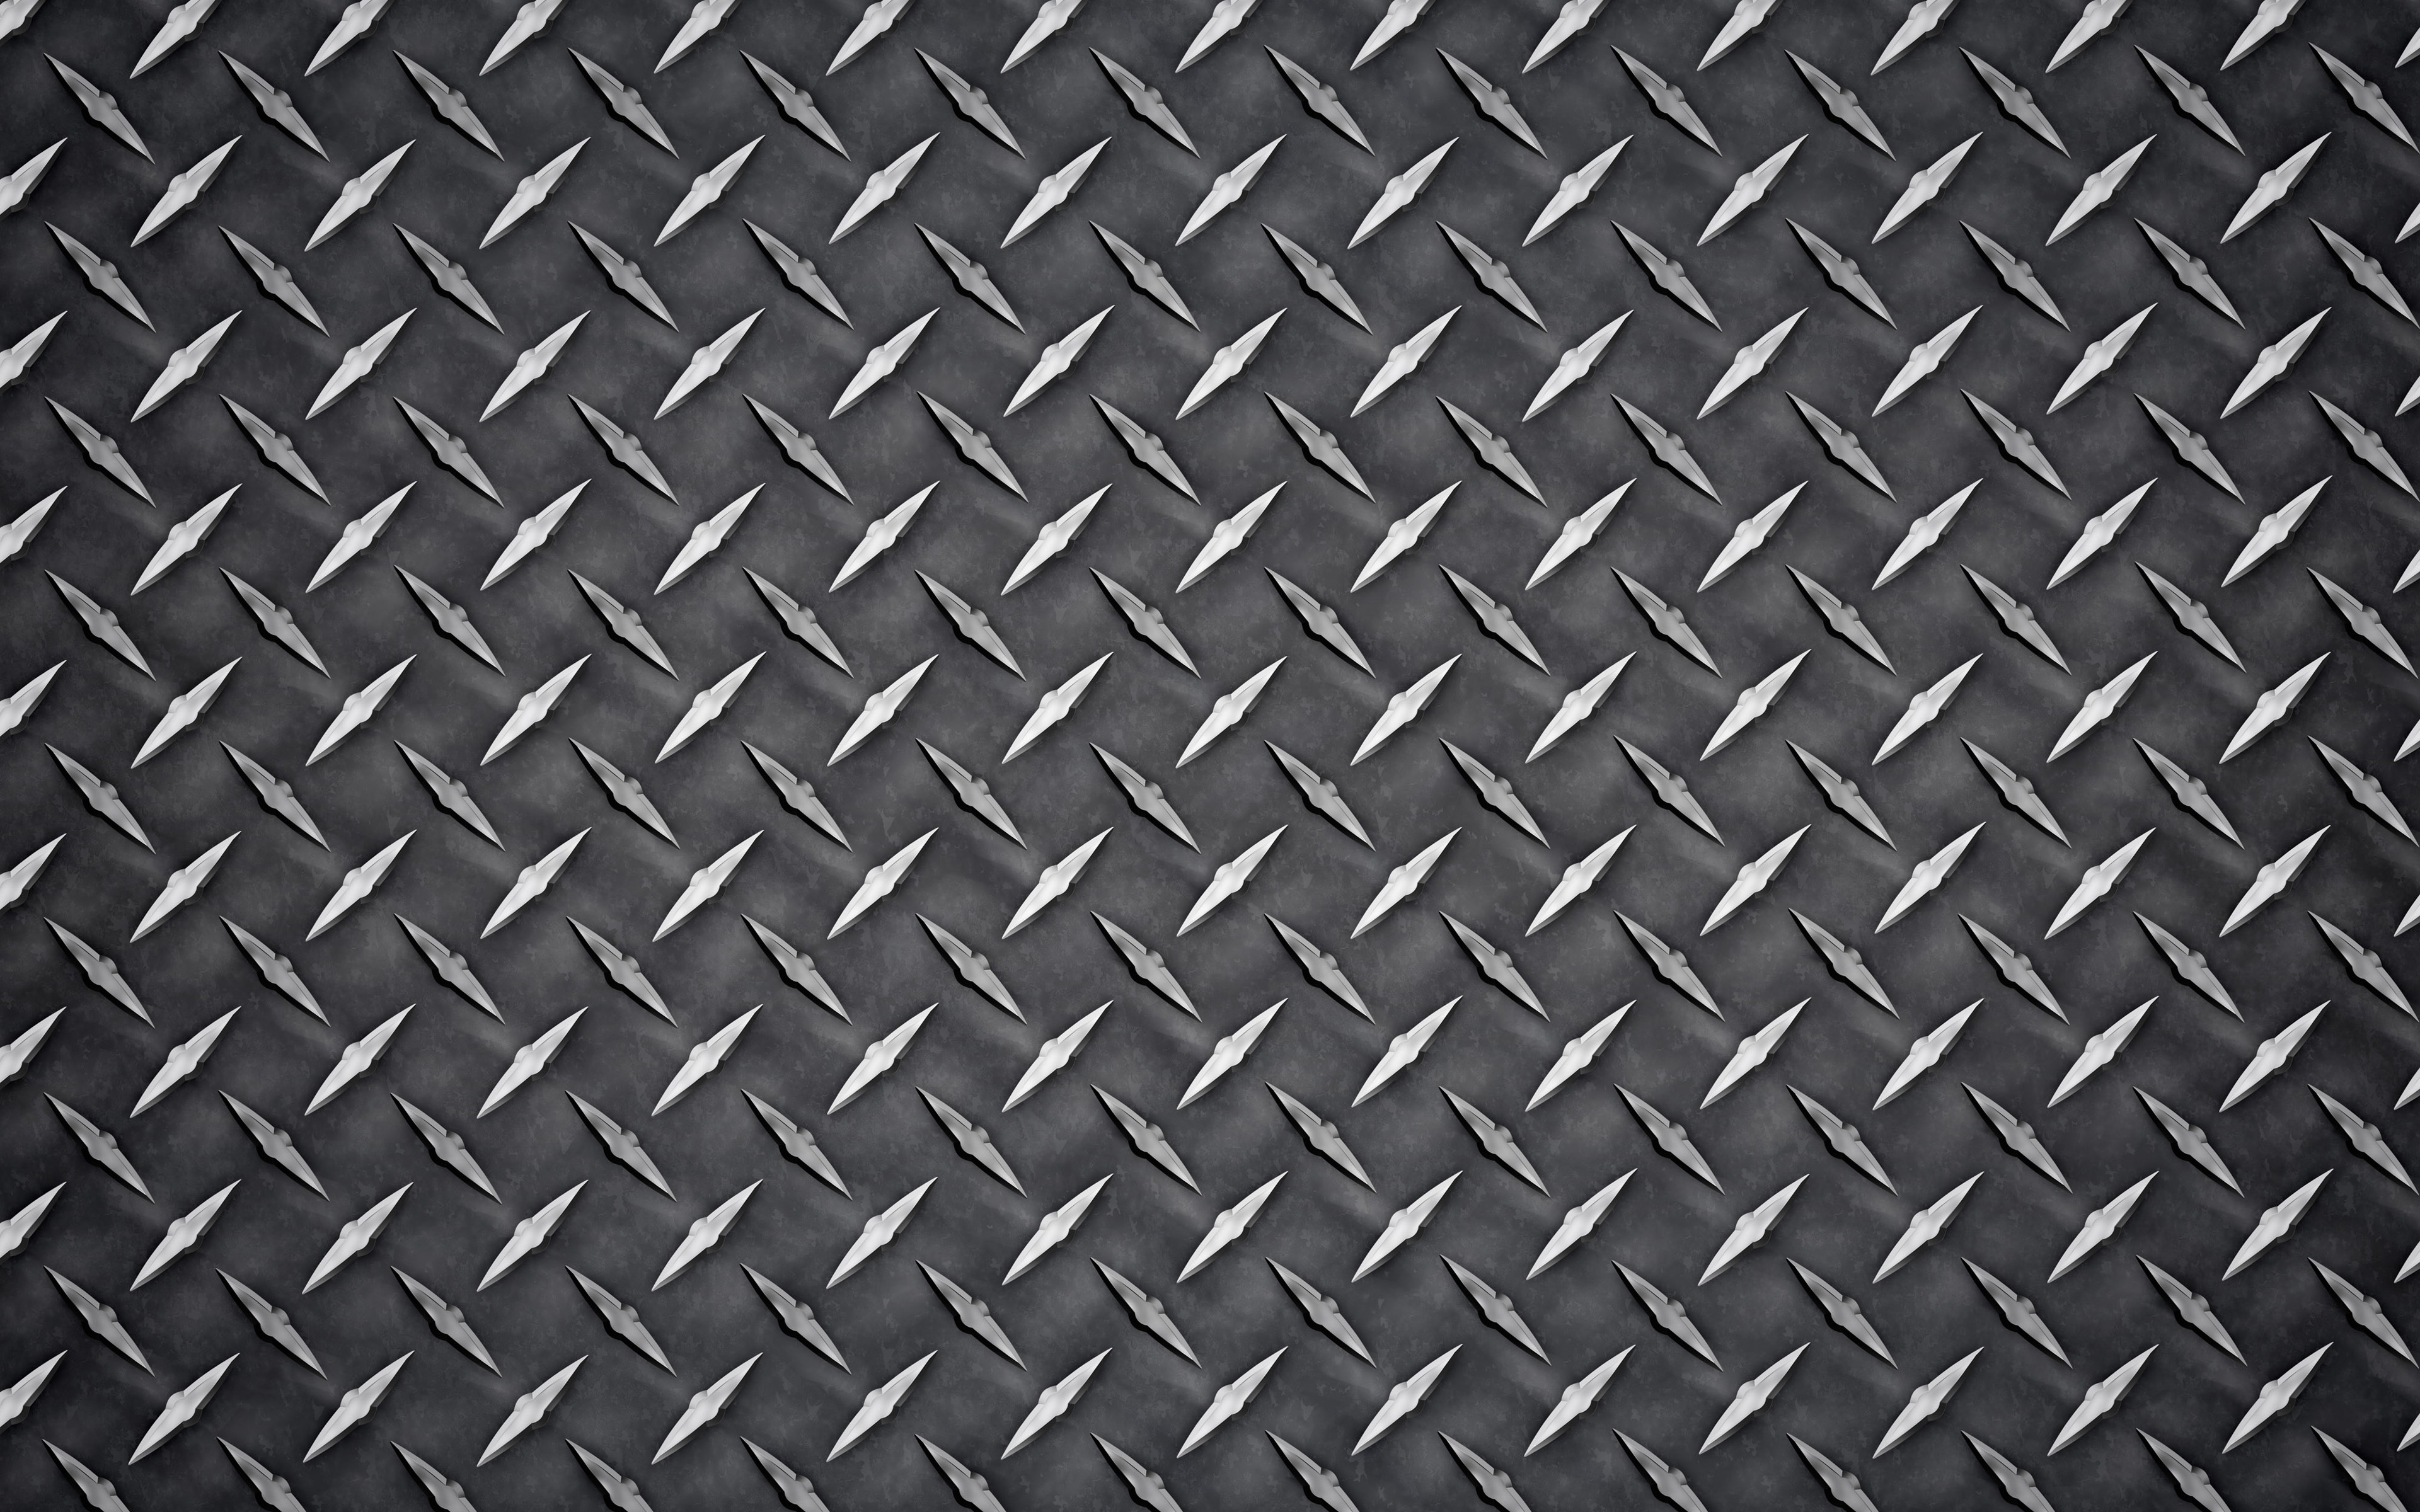 Download wallpaper gray metal plate, 4k, metal textures, grunge, gray metal background, metal plate, metal background for desktop with resolution 3840x2400. High Quality HD picture wallpaper